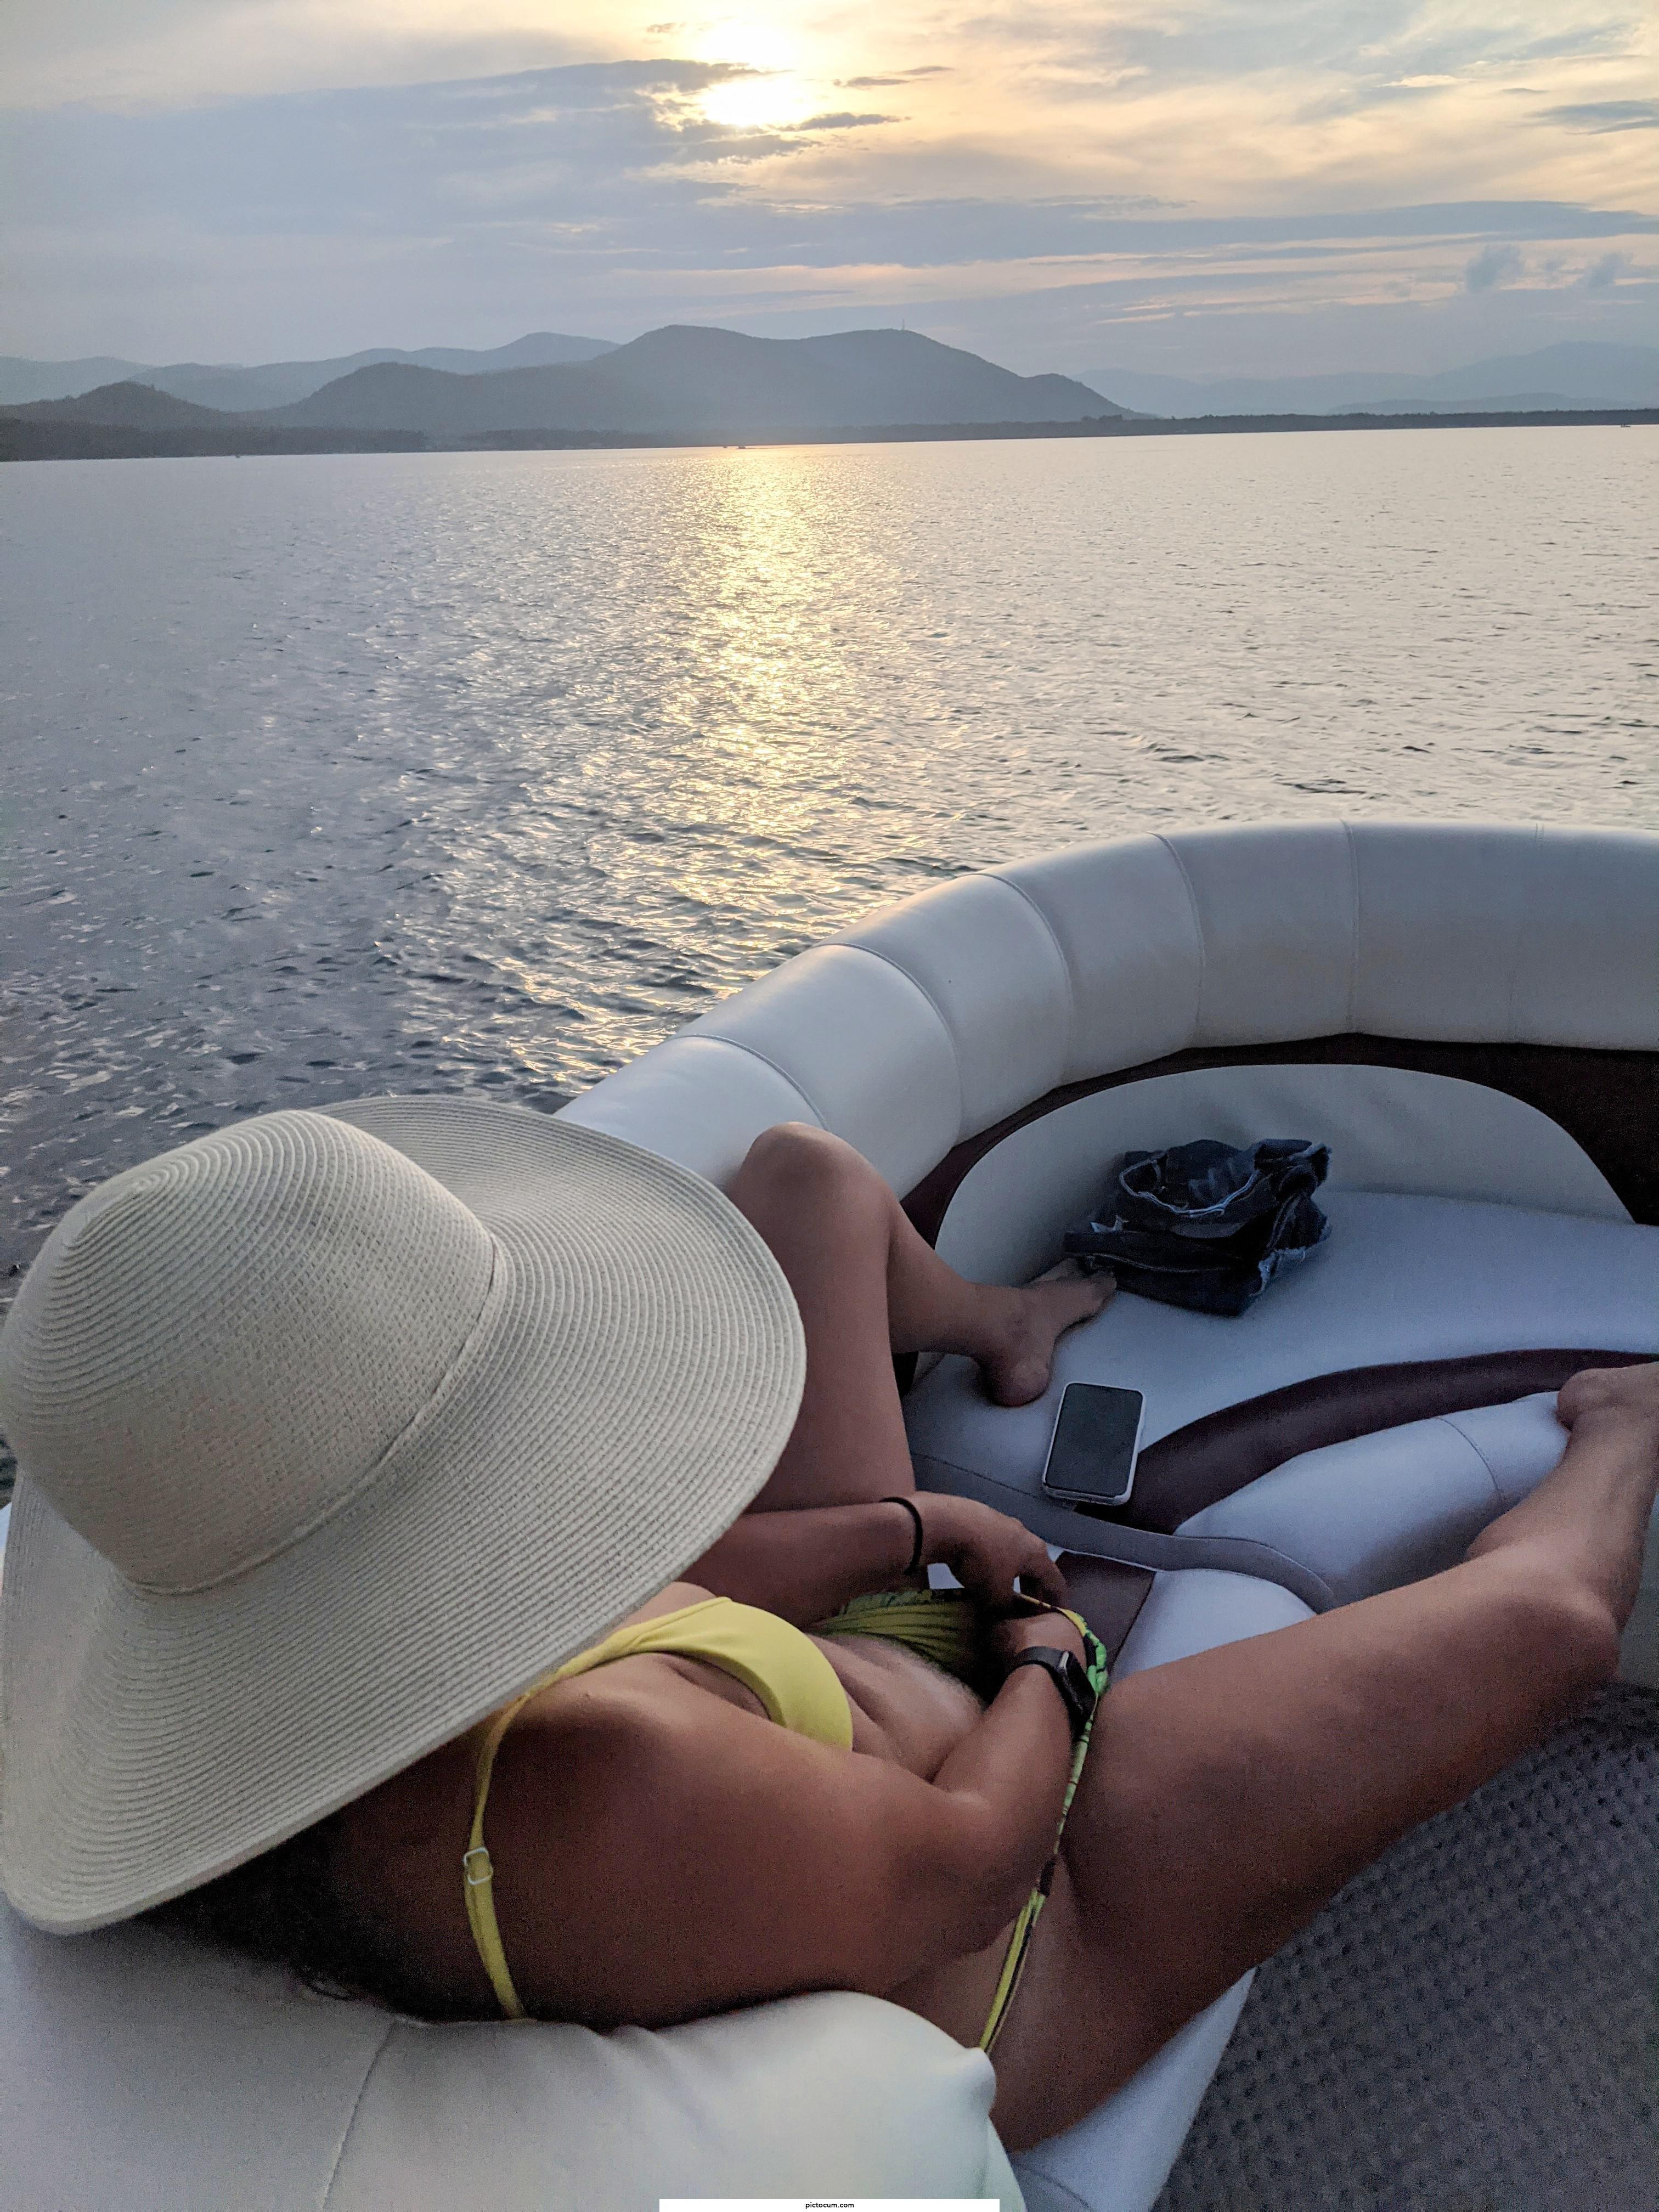 This hotwife couldn't help but play with her pussy on the lake last night! I hope a few men got to see her!